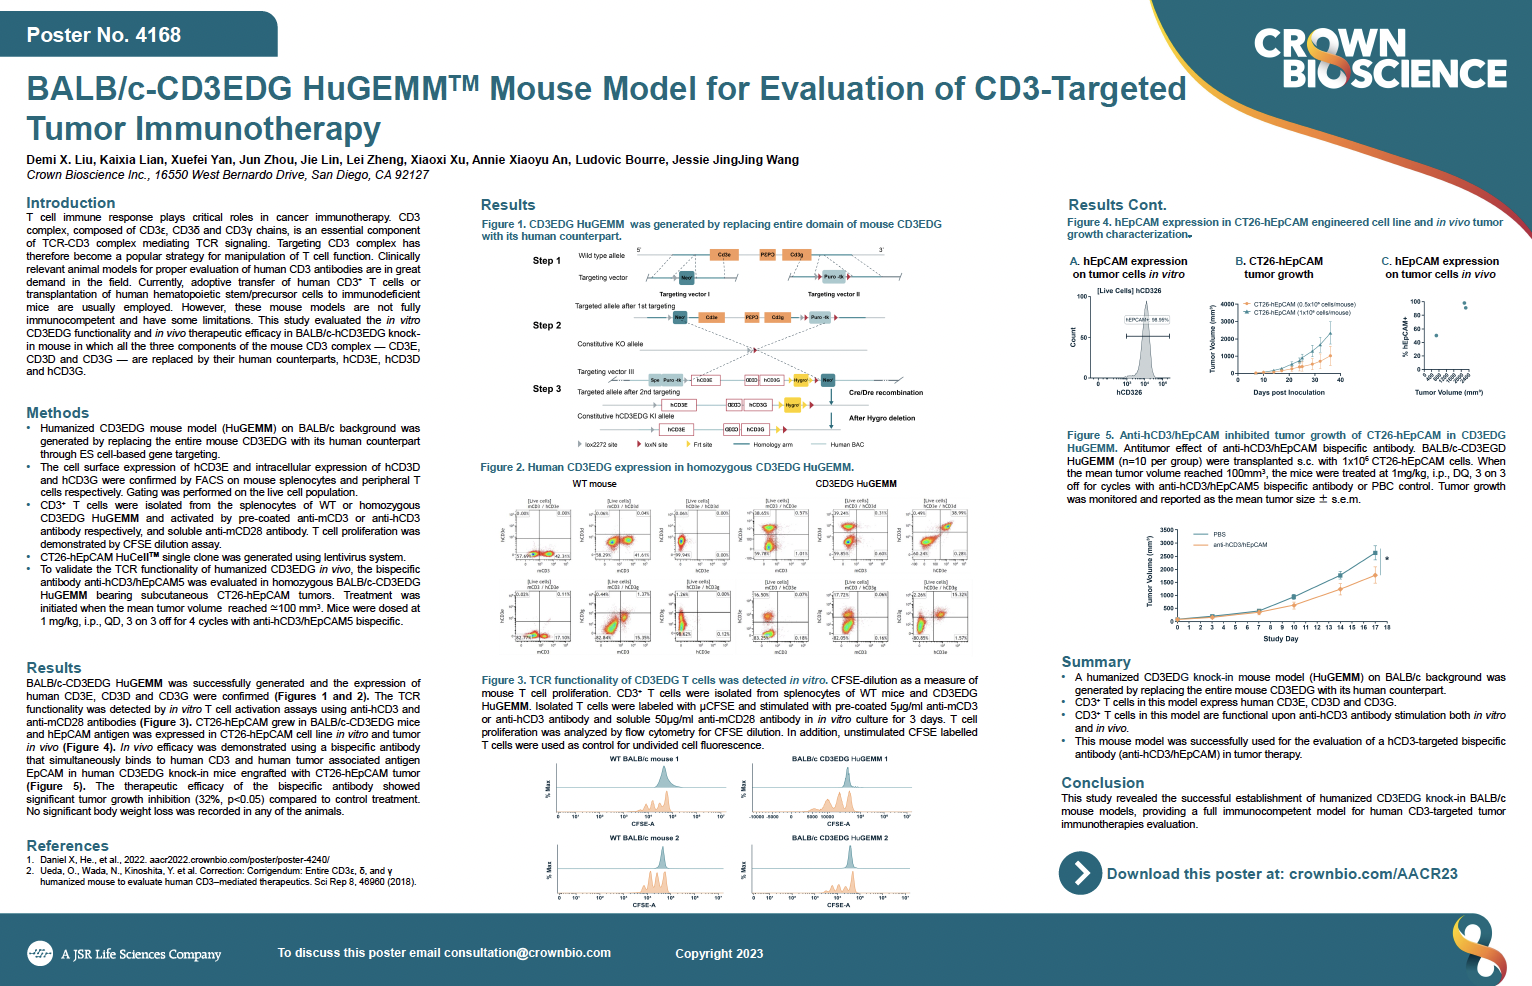 AACR 2023 Posters 4168: BALB/c-CD3EDG HuGEMM™ Mouse Model for Evaluation of CD3-targeted Tumor Immunotherapy